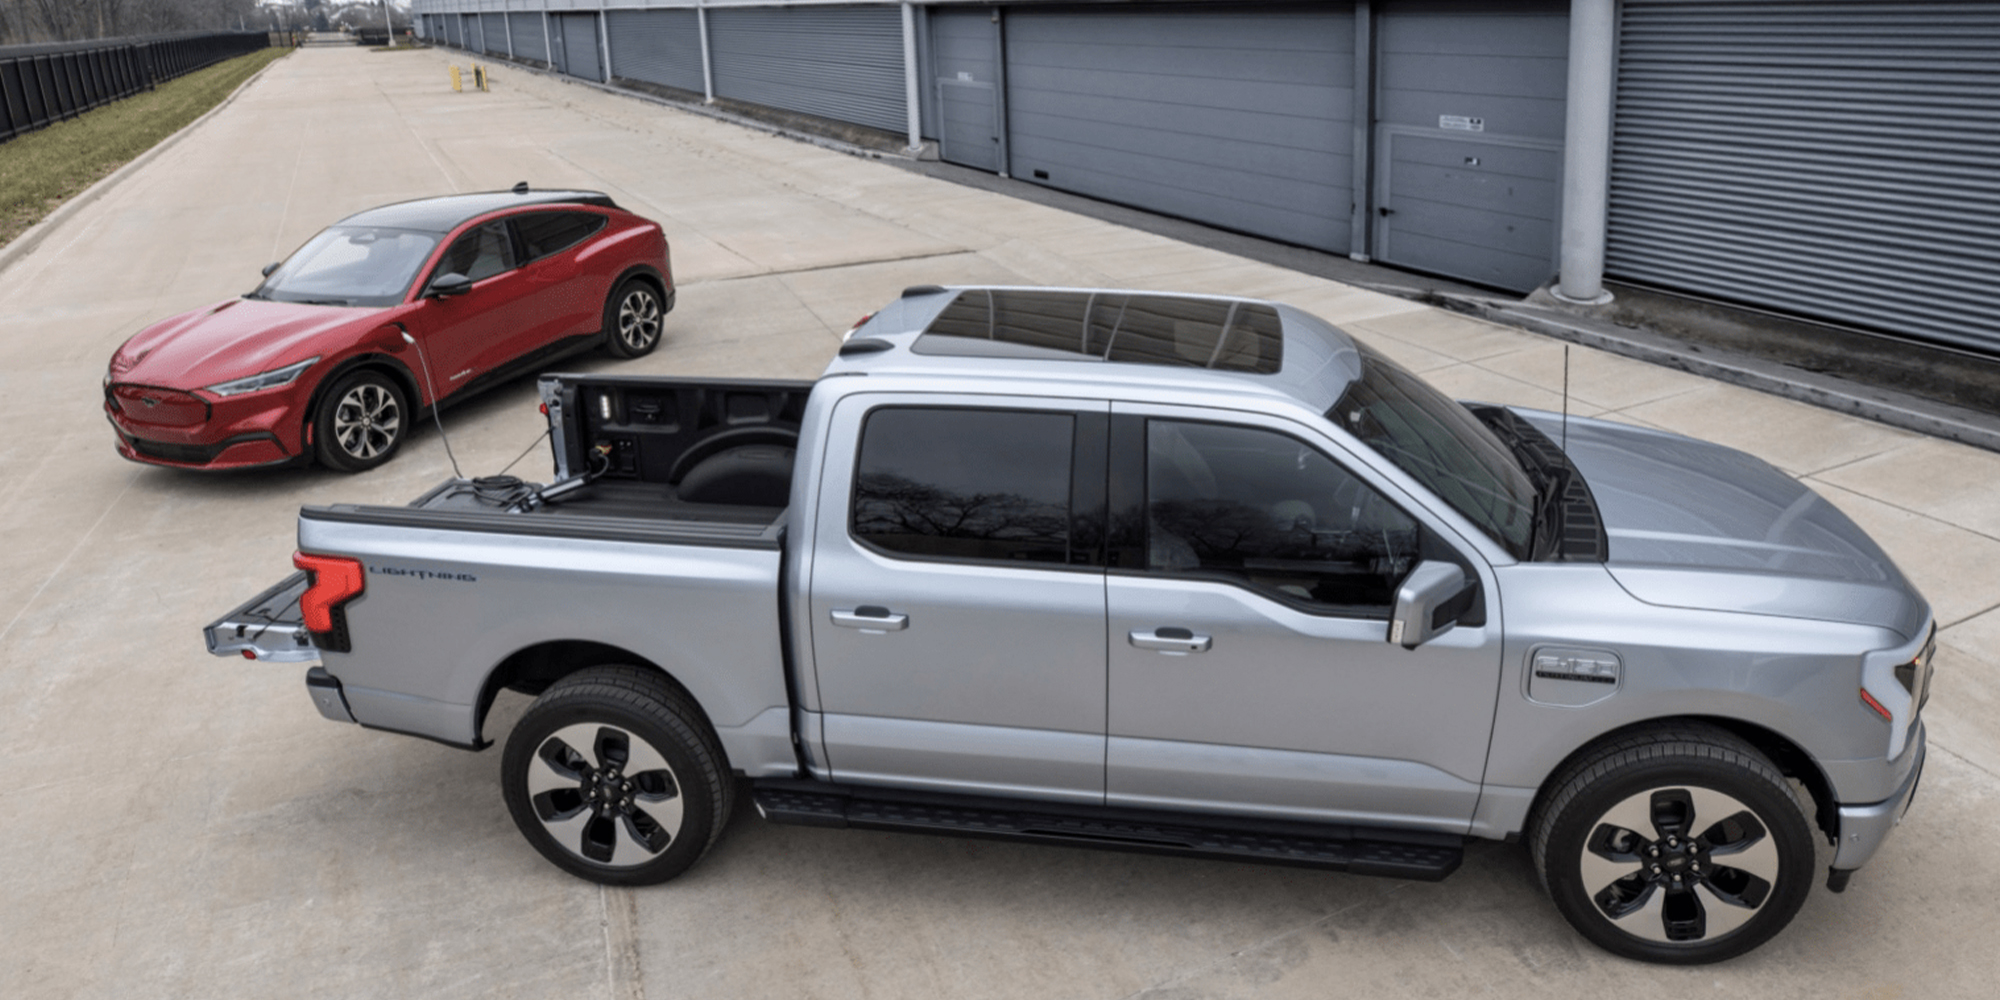 Ford dealer doubles the price of the F-150 Lightning electric pickup truck  (update, changed)